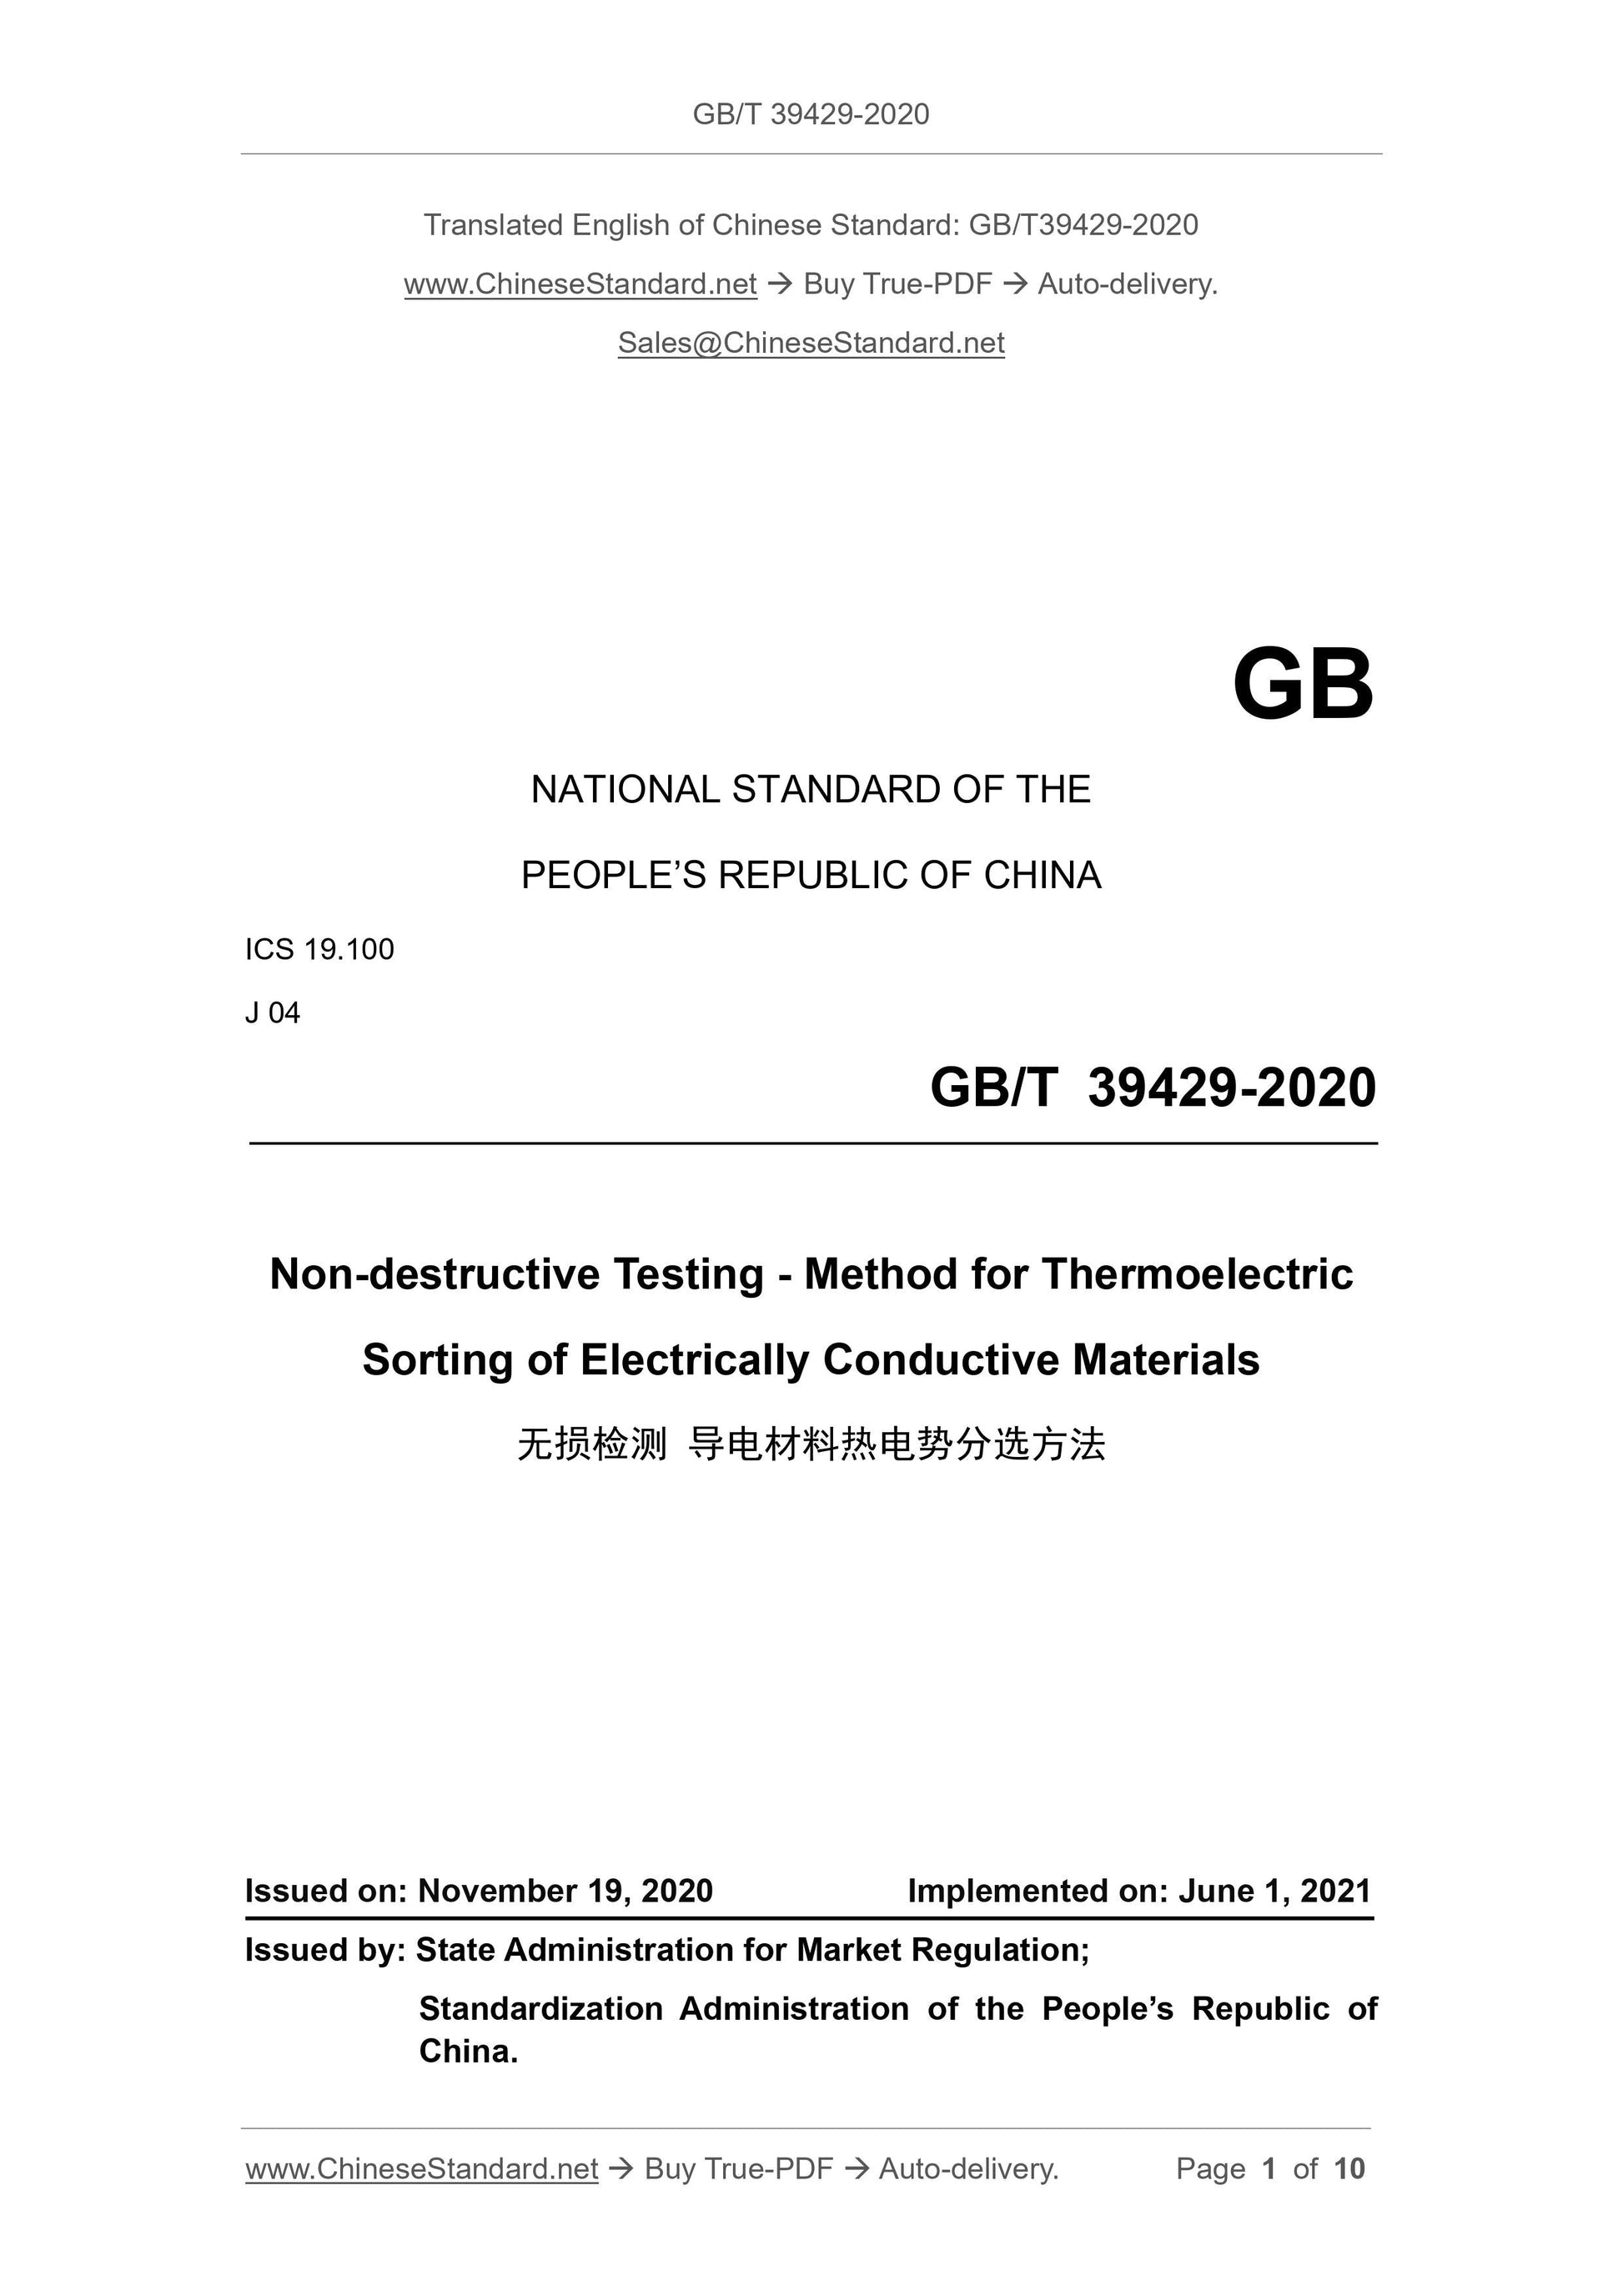 GB/T 39429-2020 Page 1